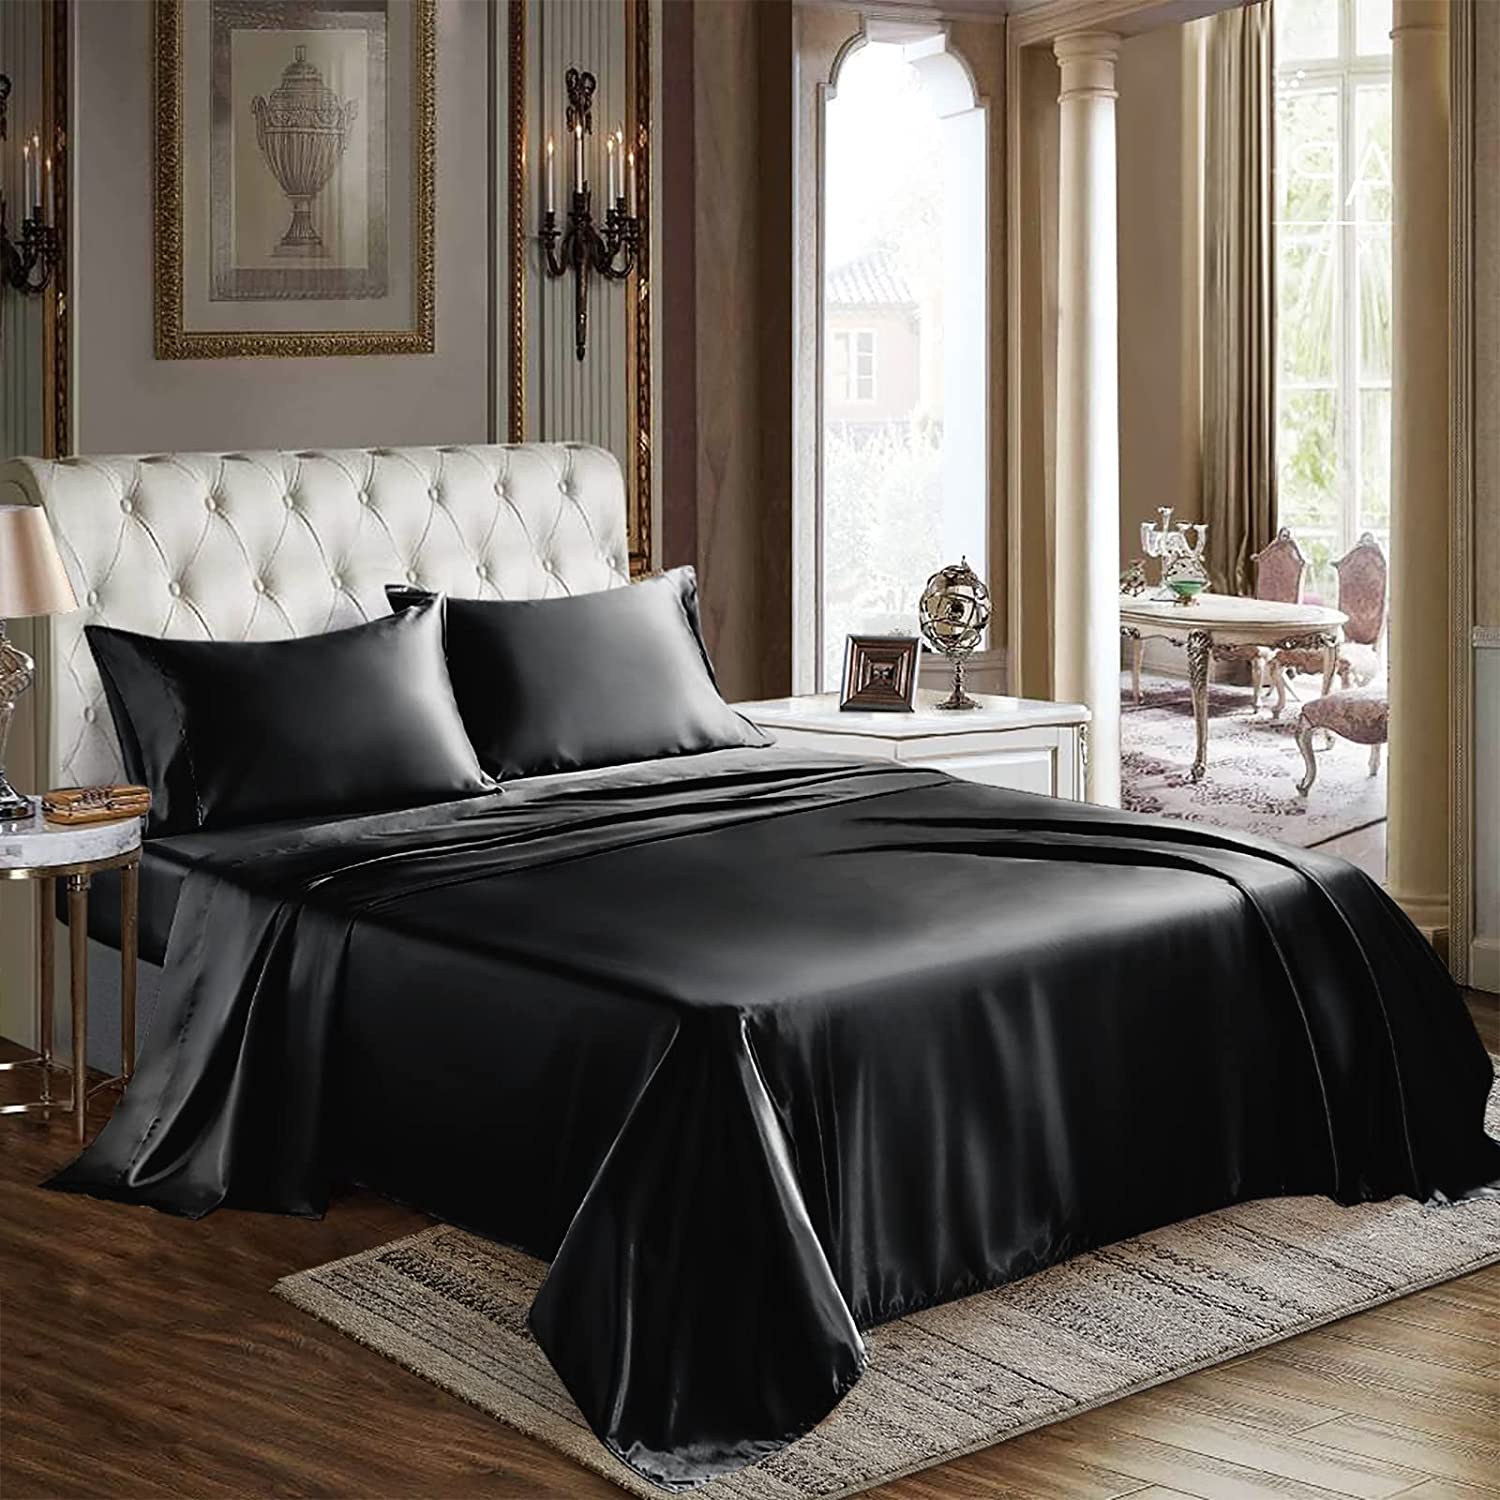  SiinvdaBZX 4Pcs Satin Sheet Set Queen Size Ultra Silky